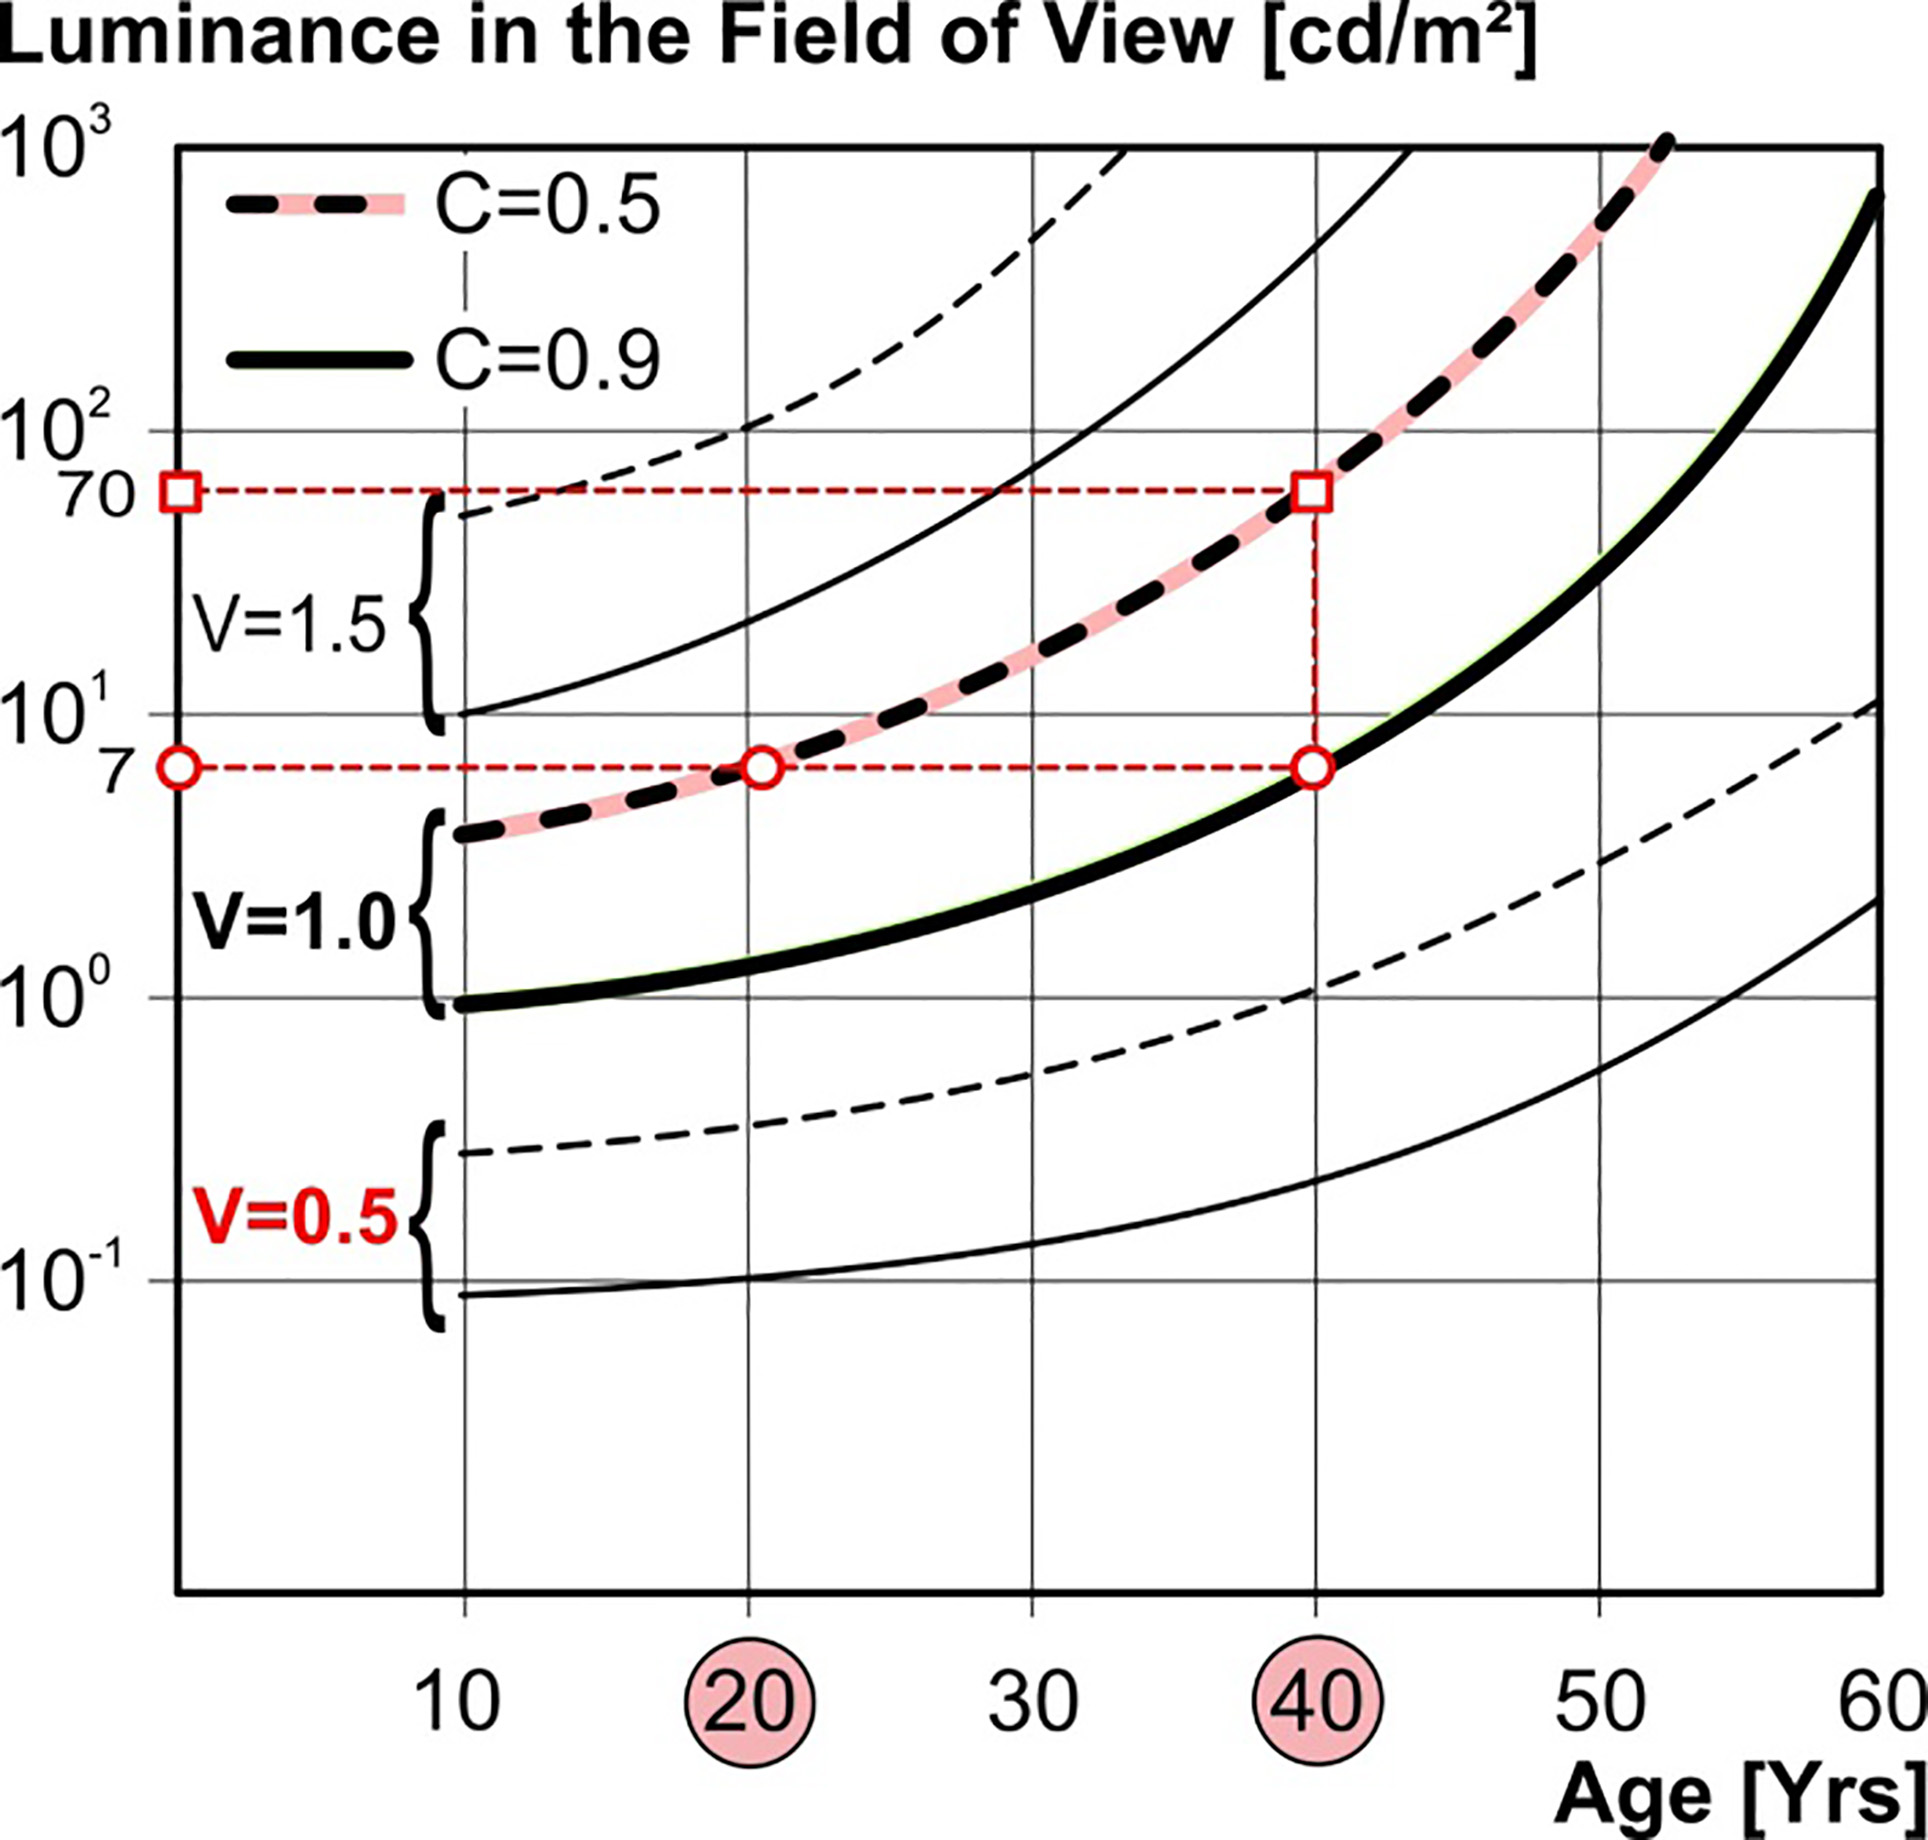 Luminance and contrast requirements with the goal of ensuring that different age groups achieve a certain visual acuity (which is required, e.g., for inspection tasks). Source [17].